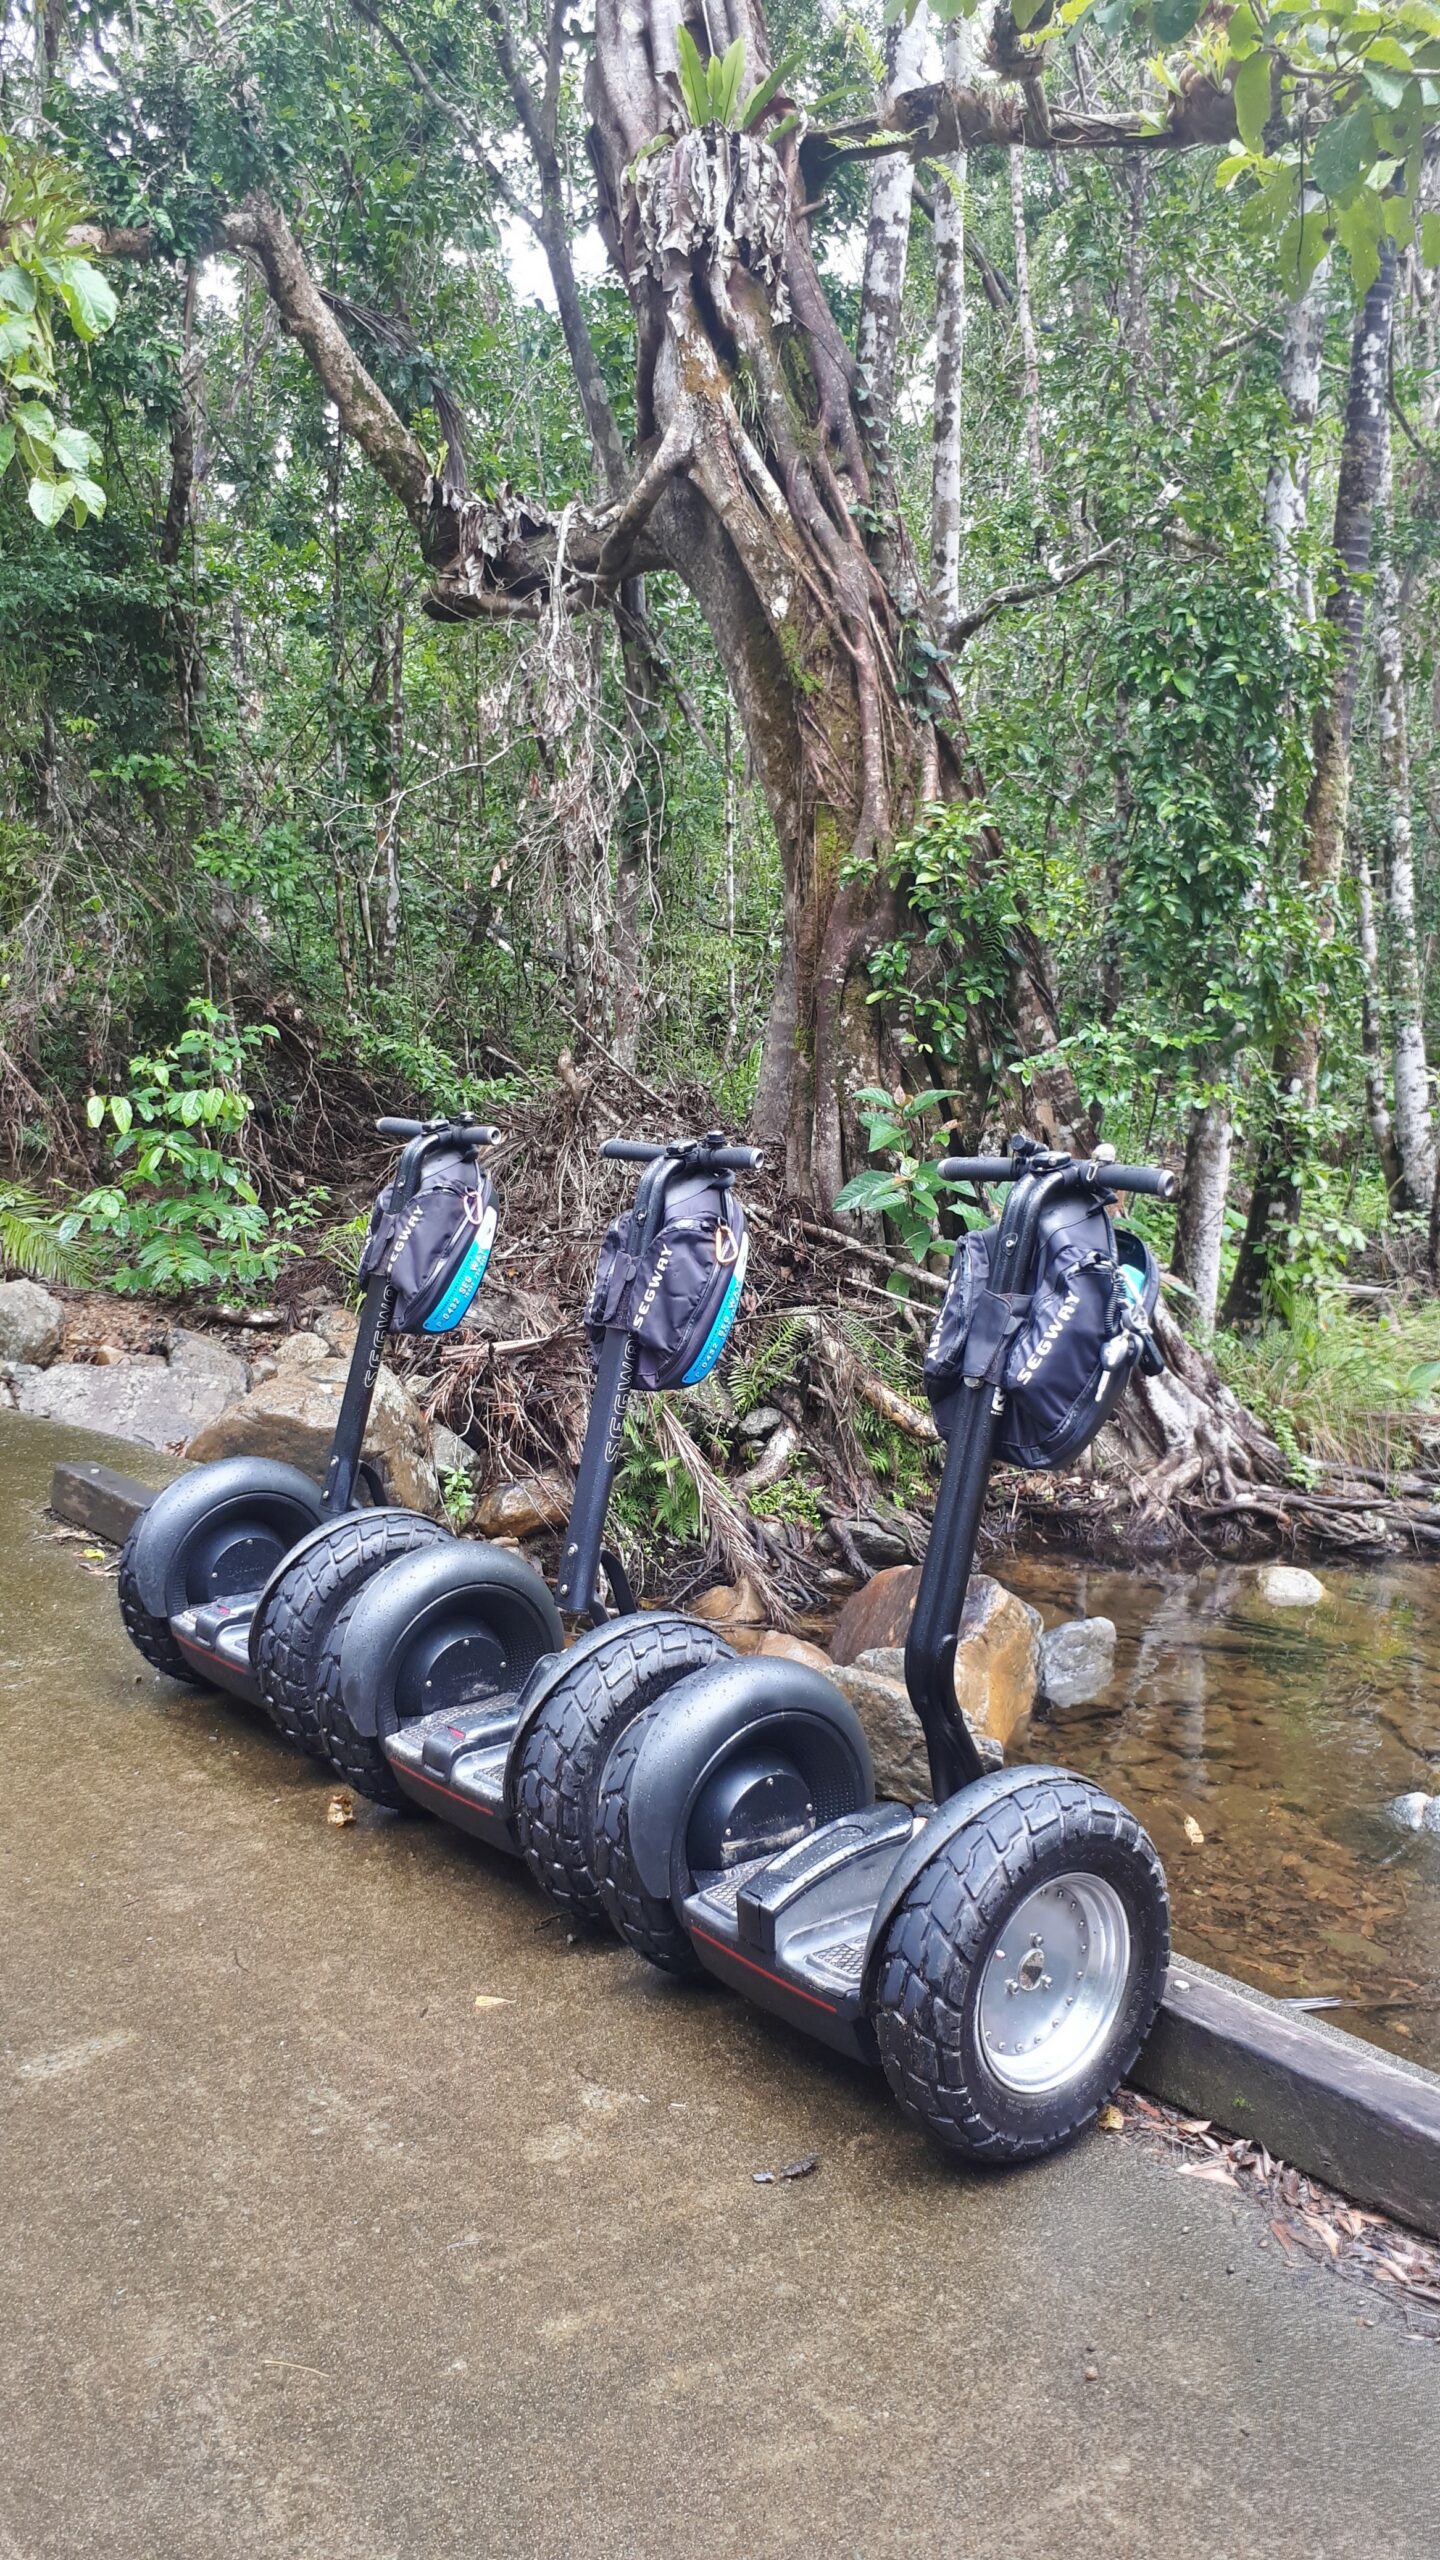 Segway Rainforest Discovery Tour